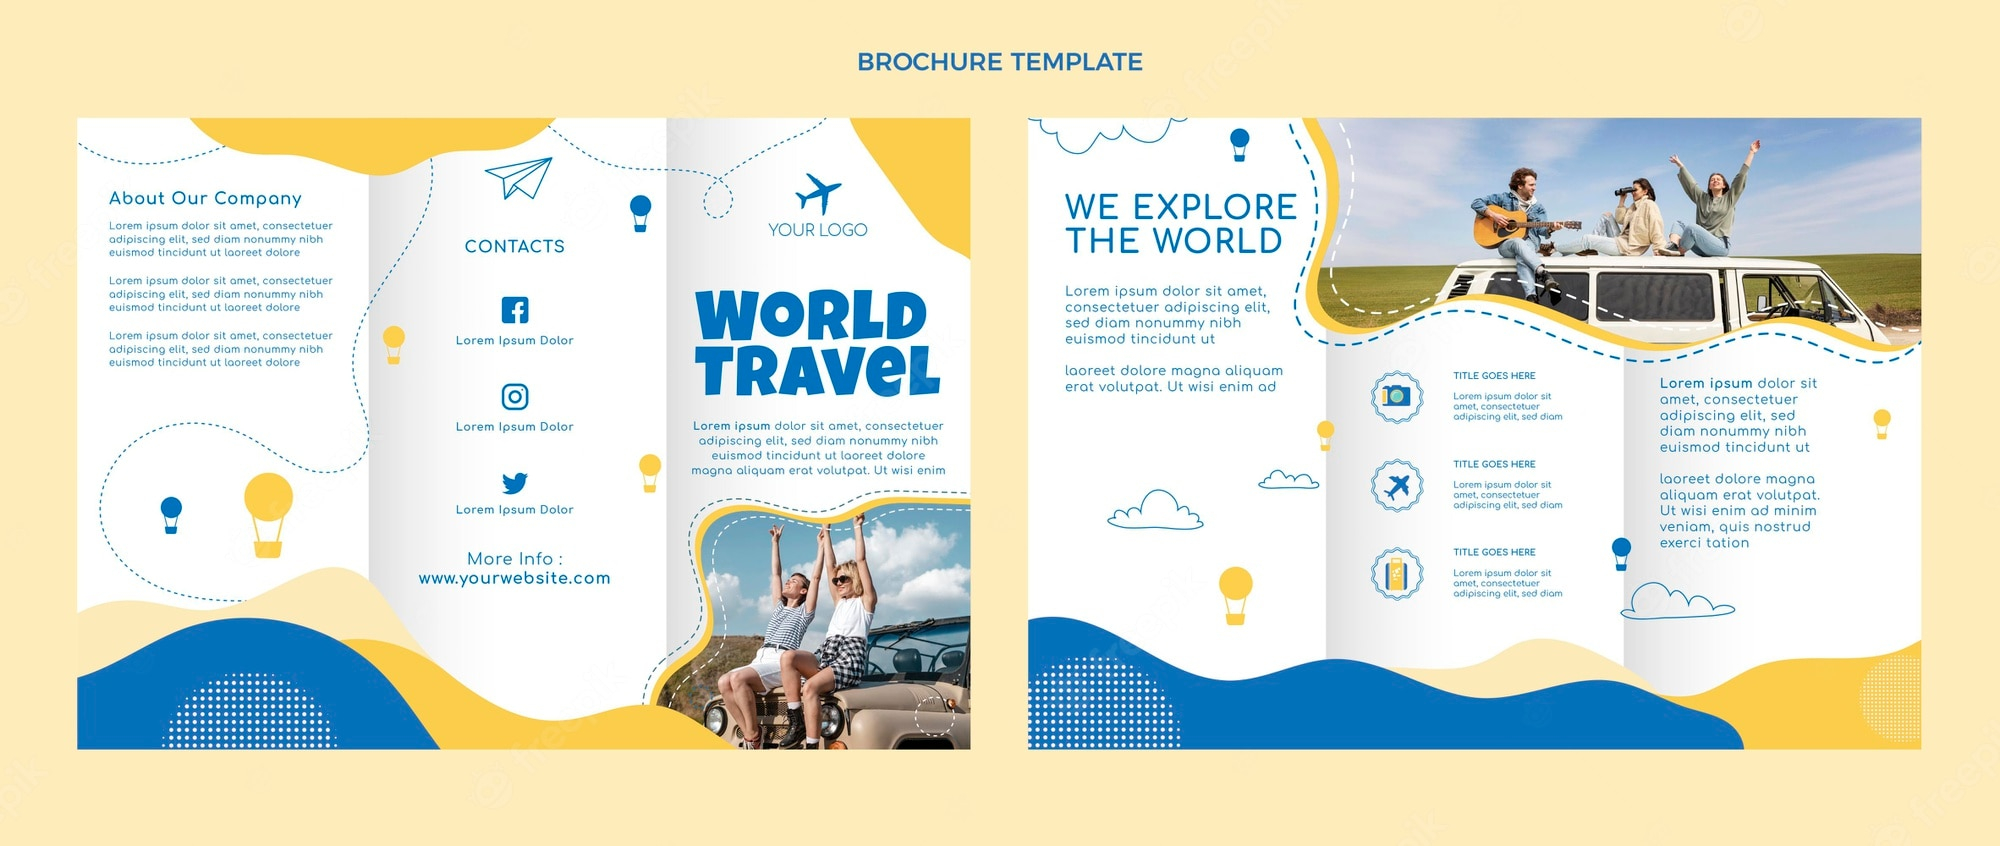 Travel brochure template Vectors & Illustrations for Free Download  Intended For Island Brochure Template